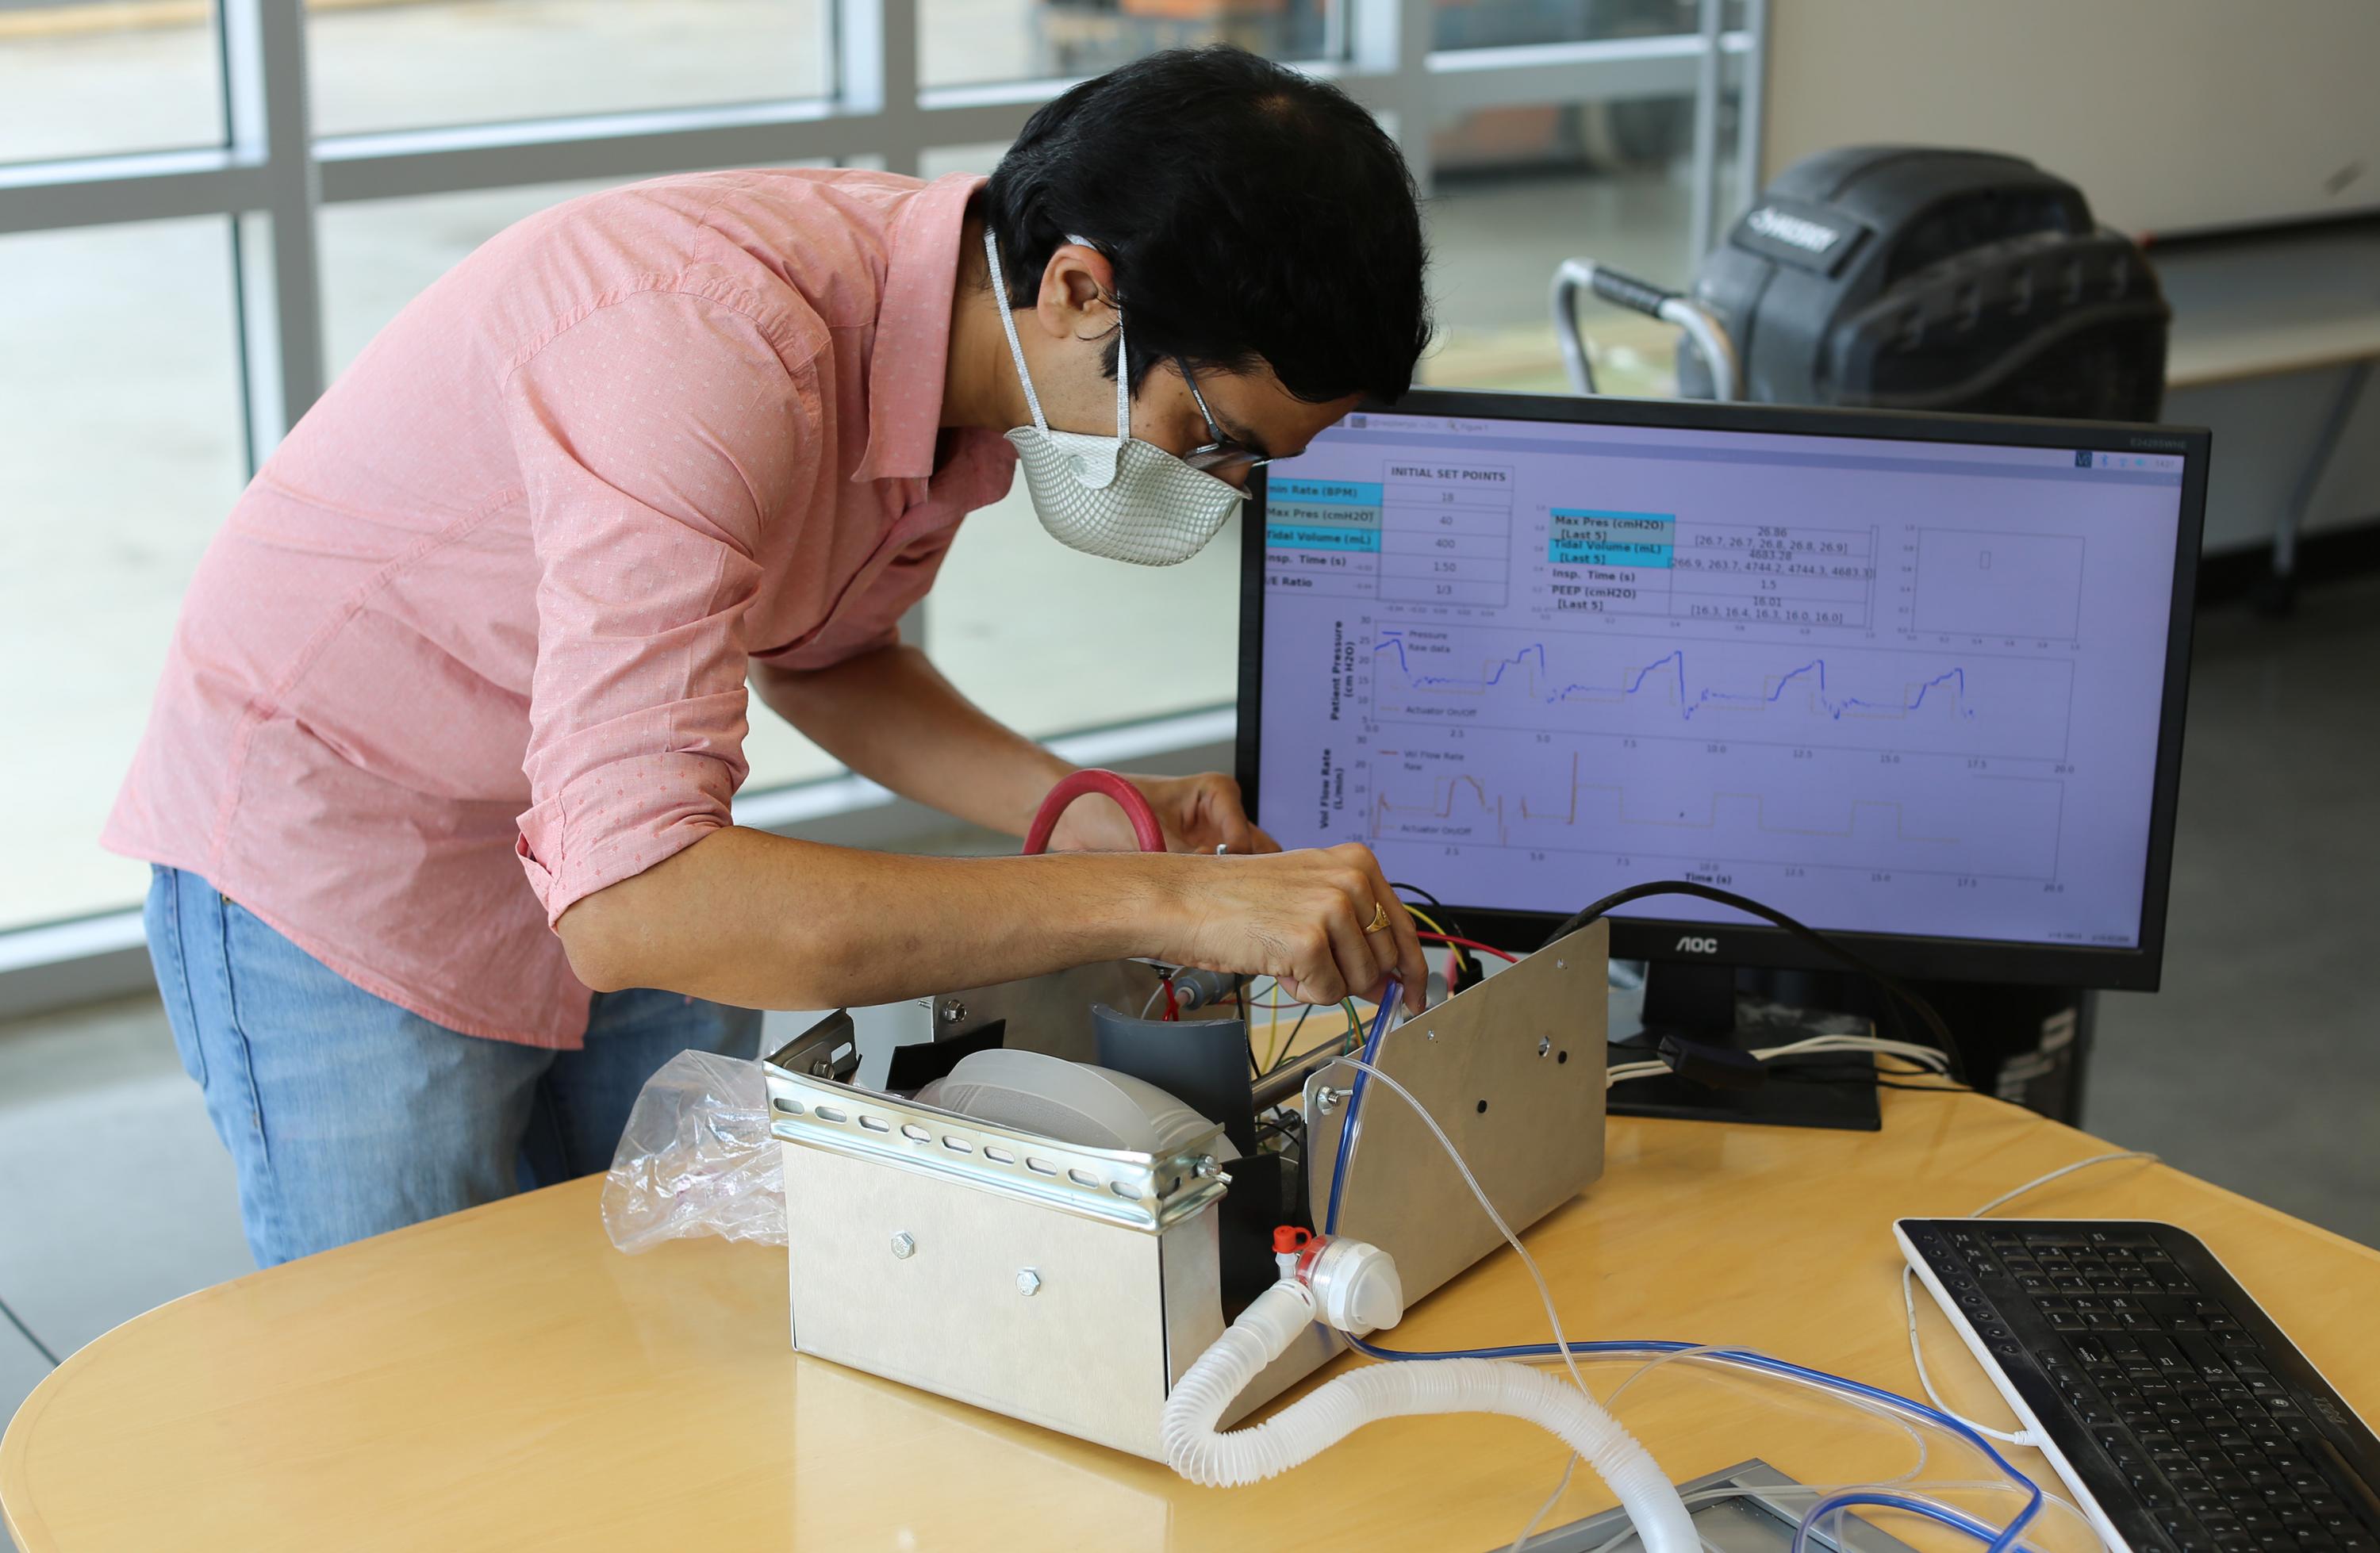 Georgia Tech Researcher Gokul Pathikonda works on the Open-AirVentGT, a low-cost, portable emergency ventilator that uses electronic sensors and computer control to manage key clinical parameters. (Credit: Ben Wright, Georgia Tech)